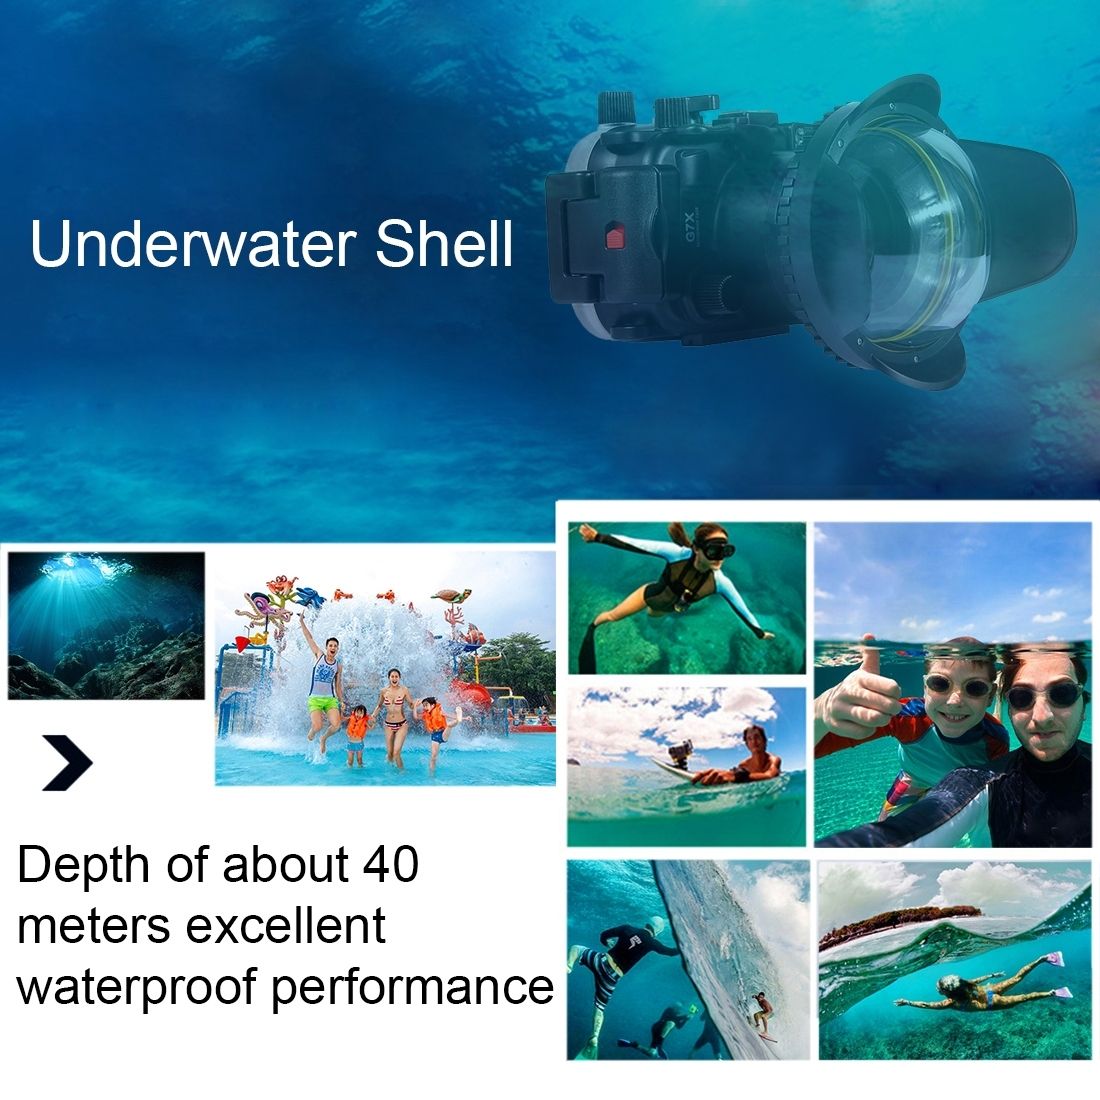 PULUZ-PU8001-Optical-Fisheye-Lens-Shade-Wide-Angle-Dome-Port-Lens-for-Underwater-Housings-1249720